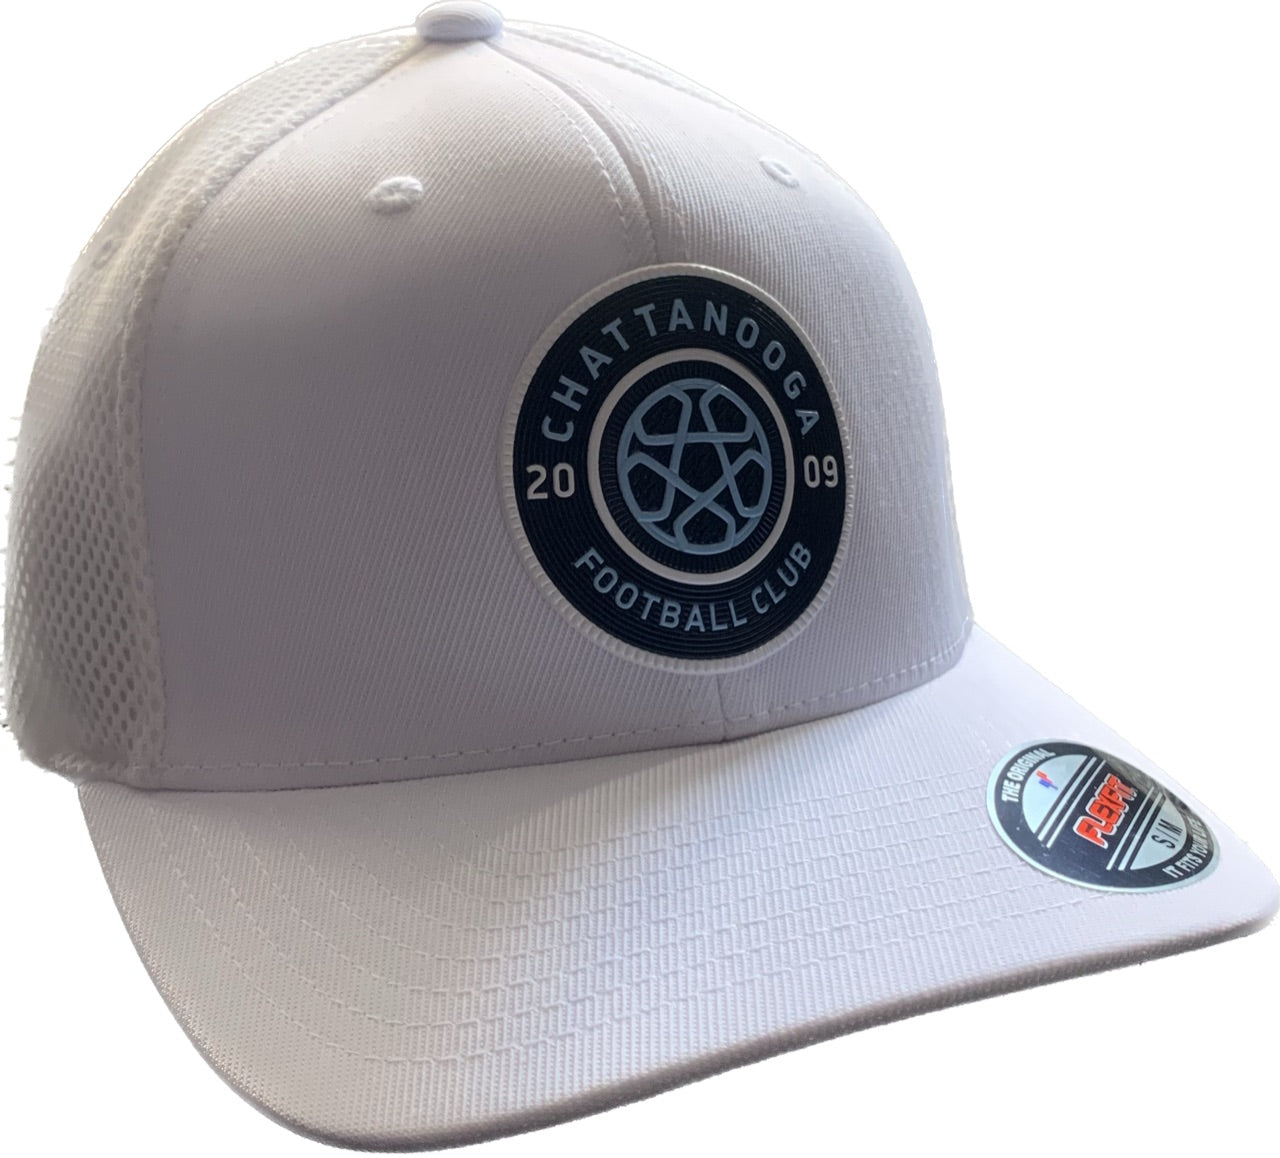 Flex Fit Cap (White/White) – at Chattanooga The FC Shop